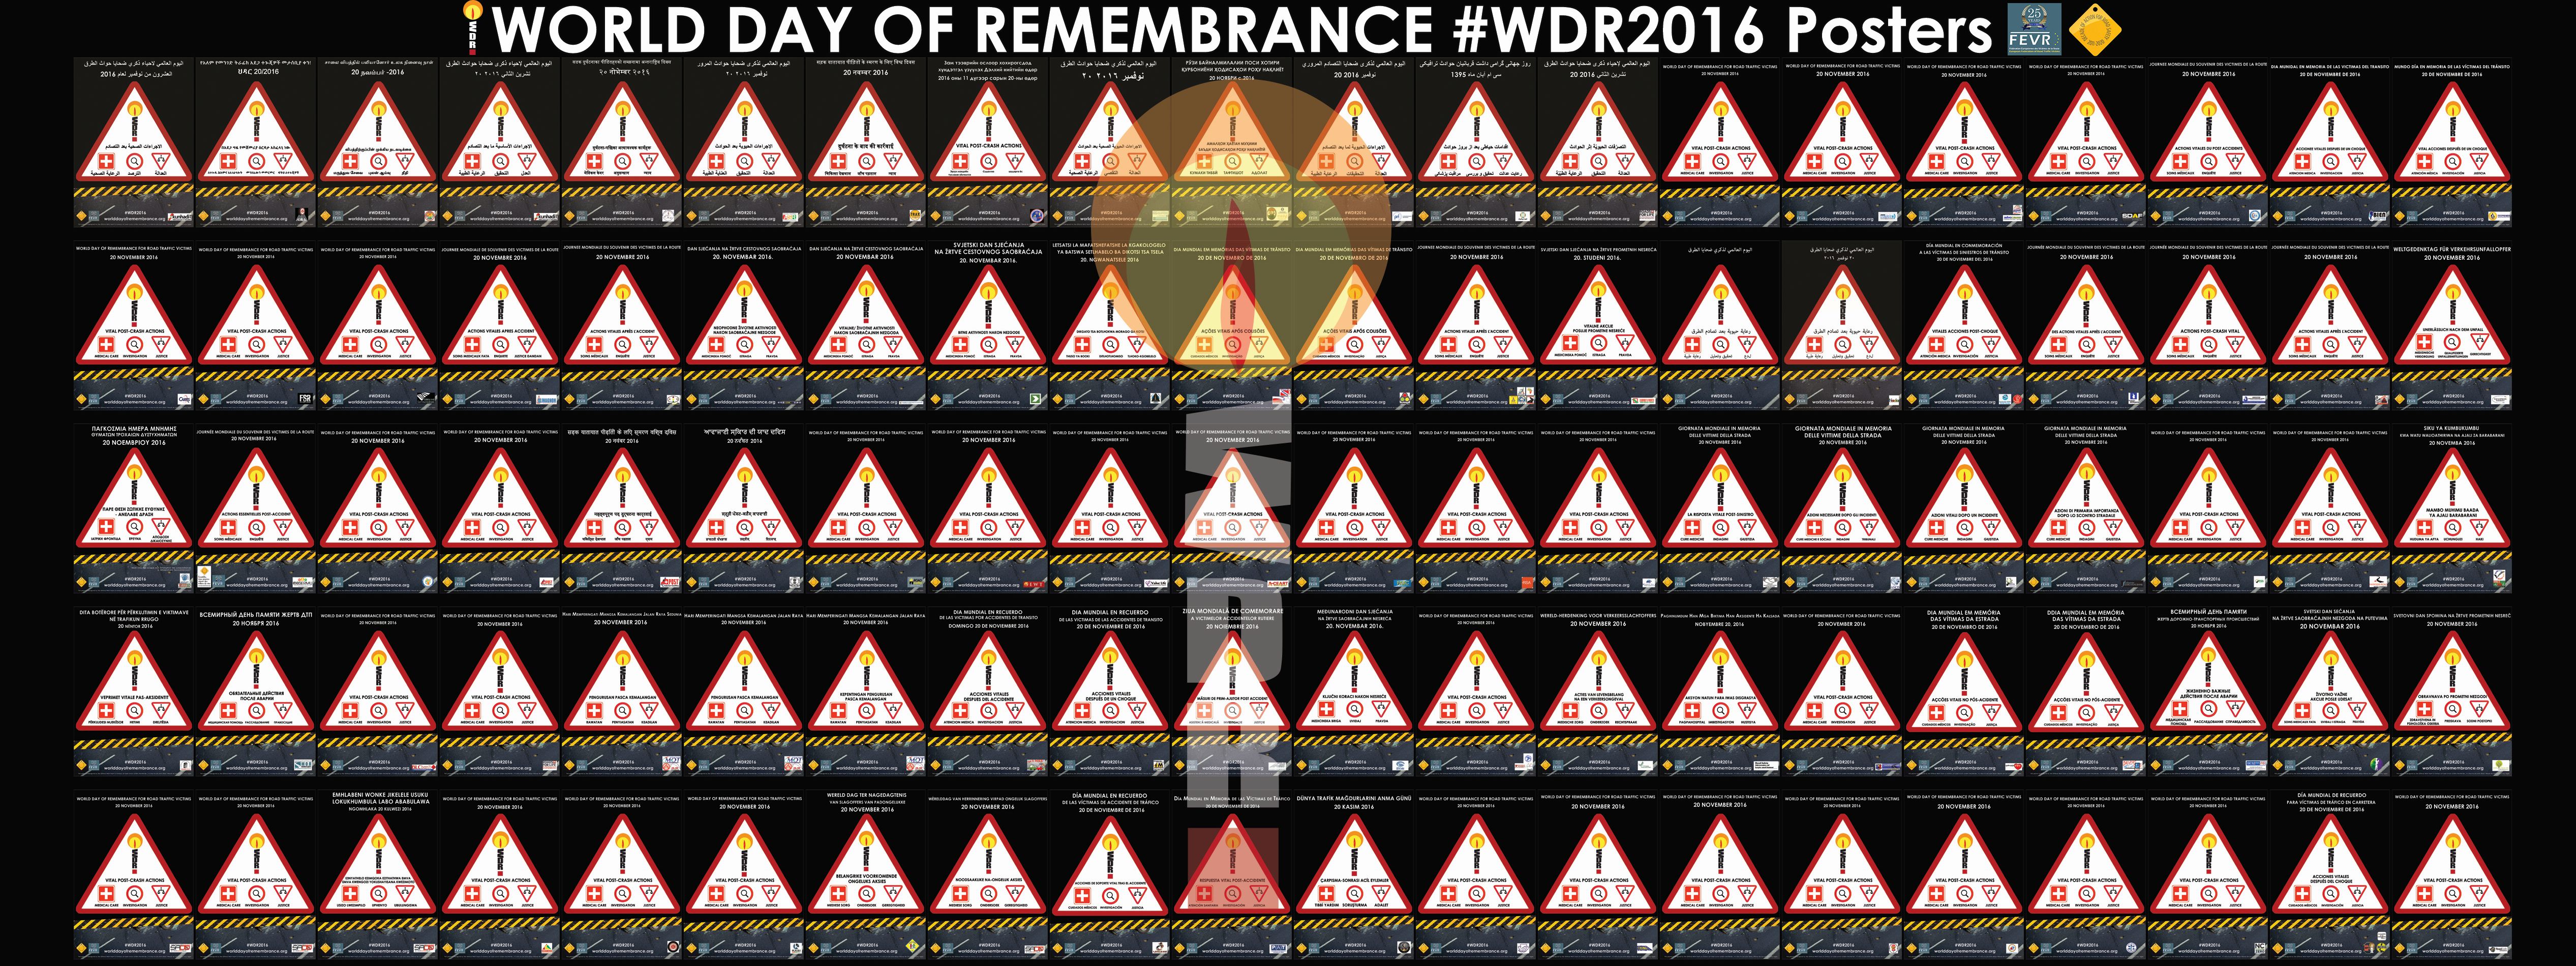 #WDR2016 - Wall of WDR Posters